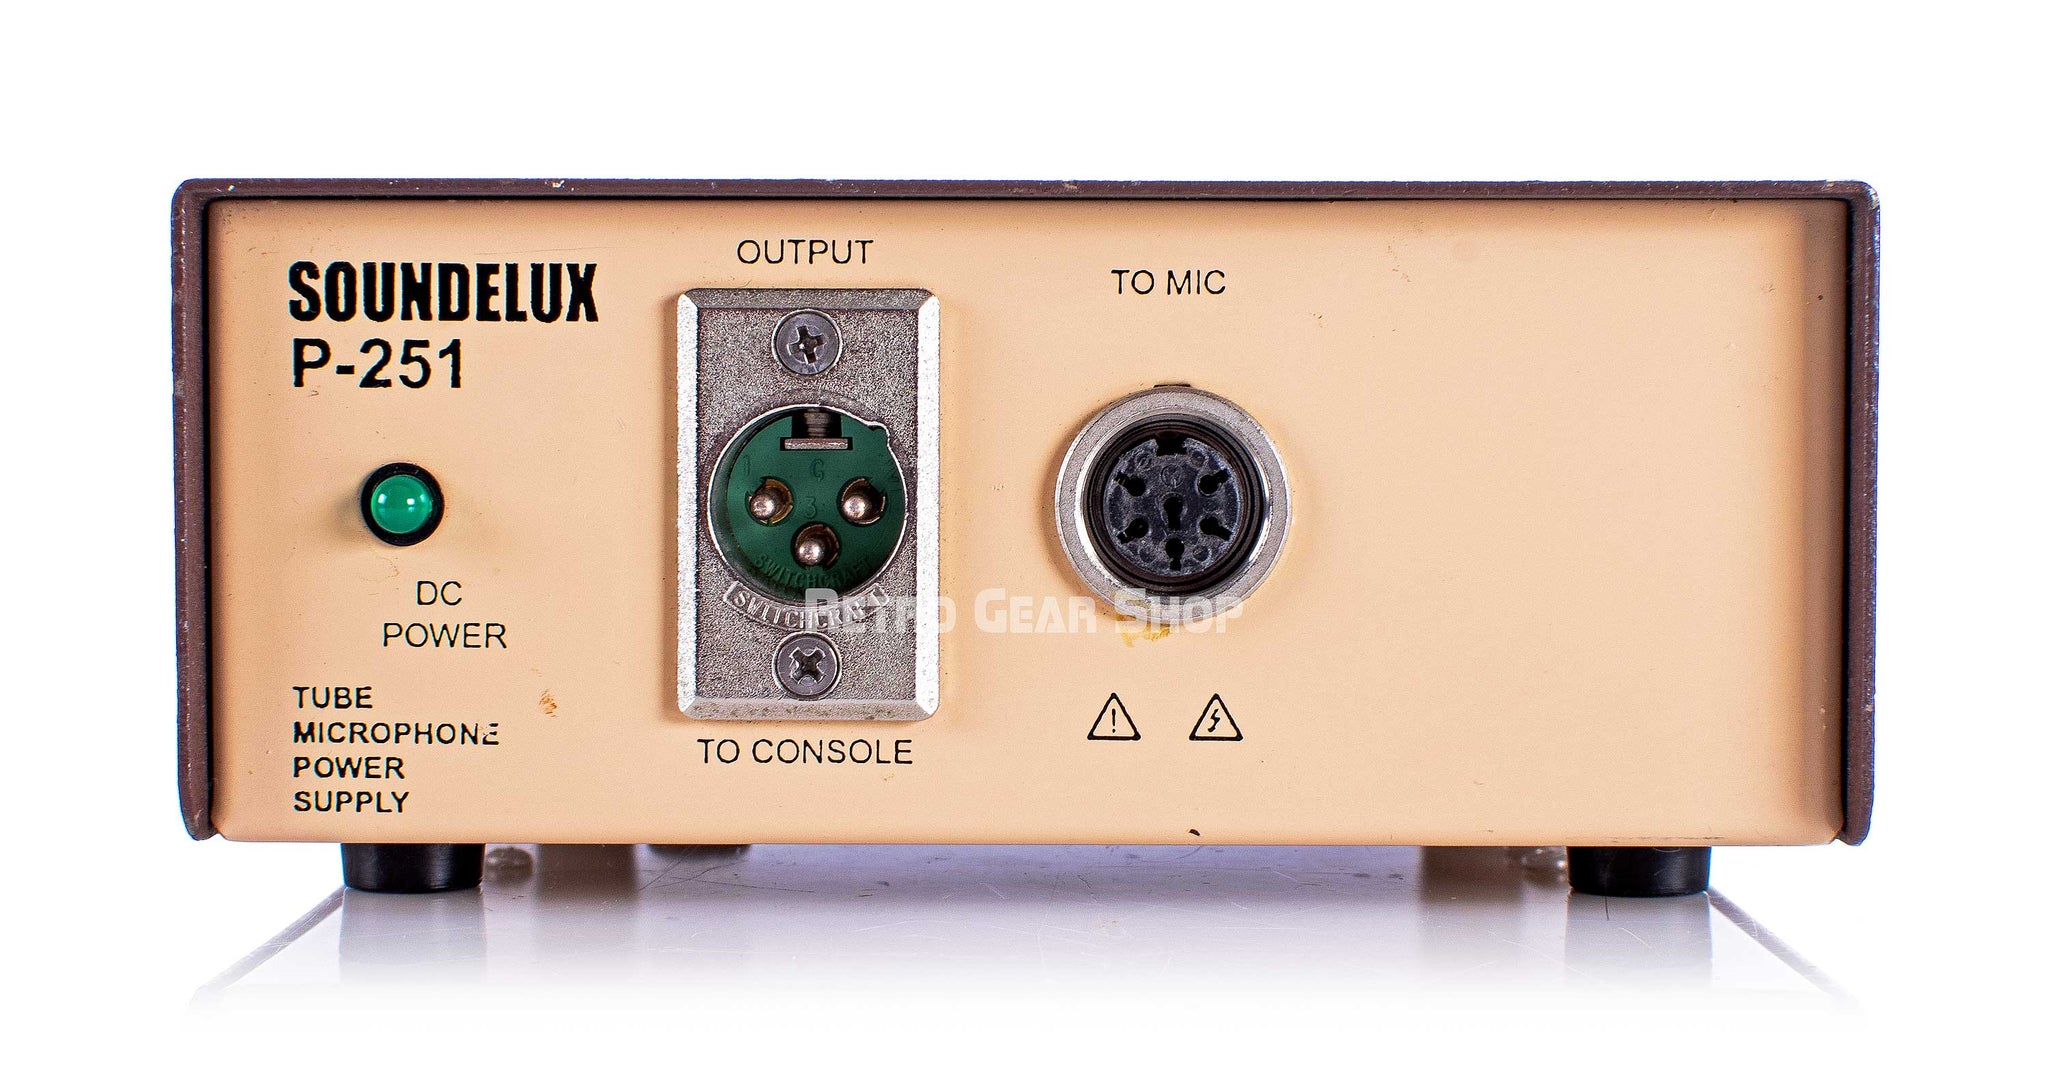 Soundelux e251c Power Supply P-251 Front